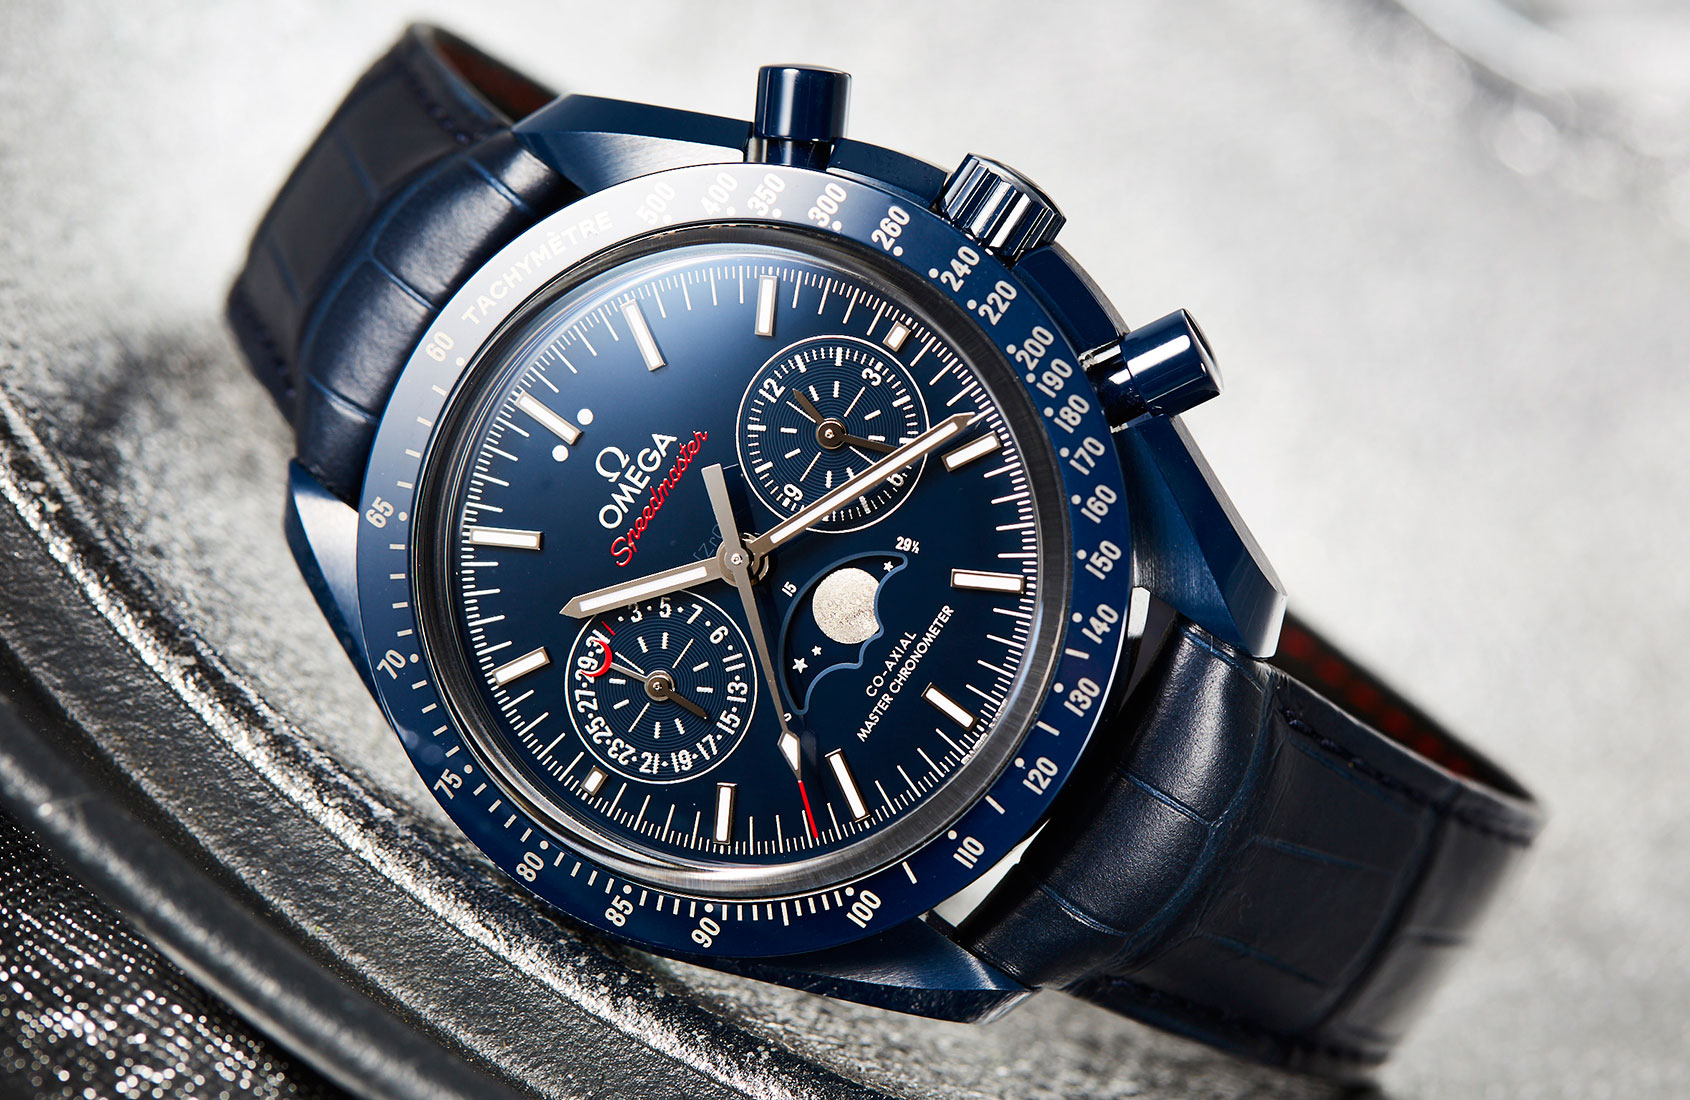 Taking another look at the Omega Speedmaster Blue Side Of The Moon